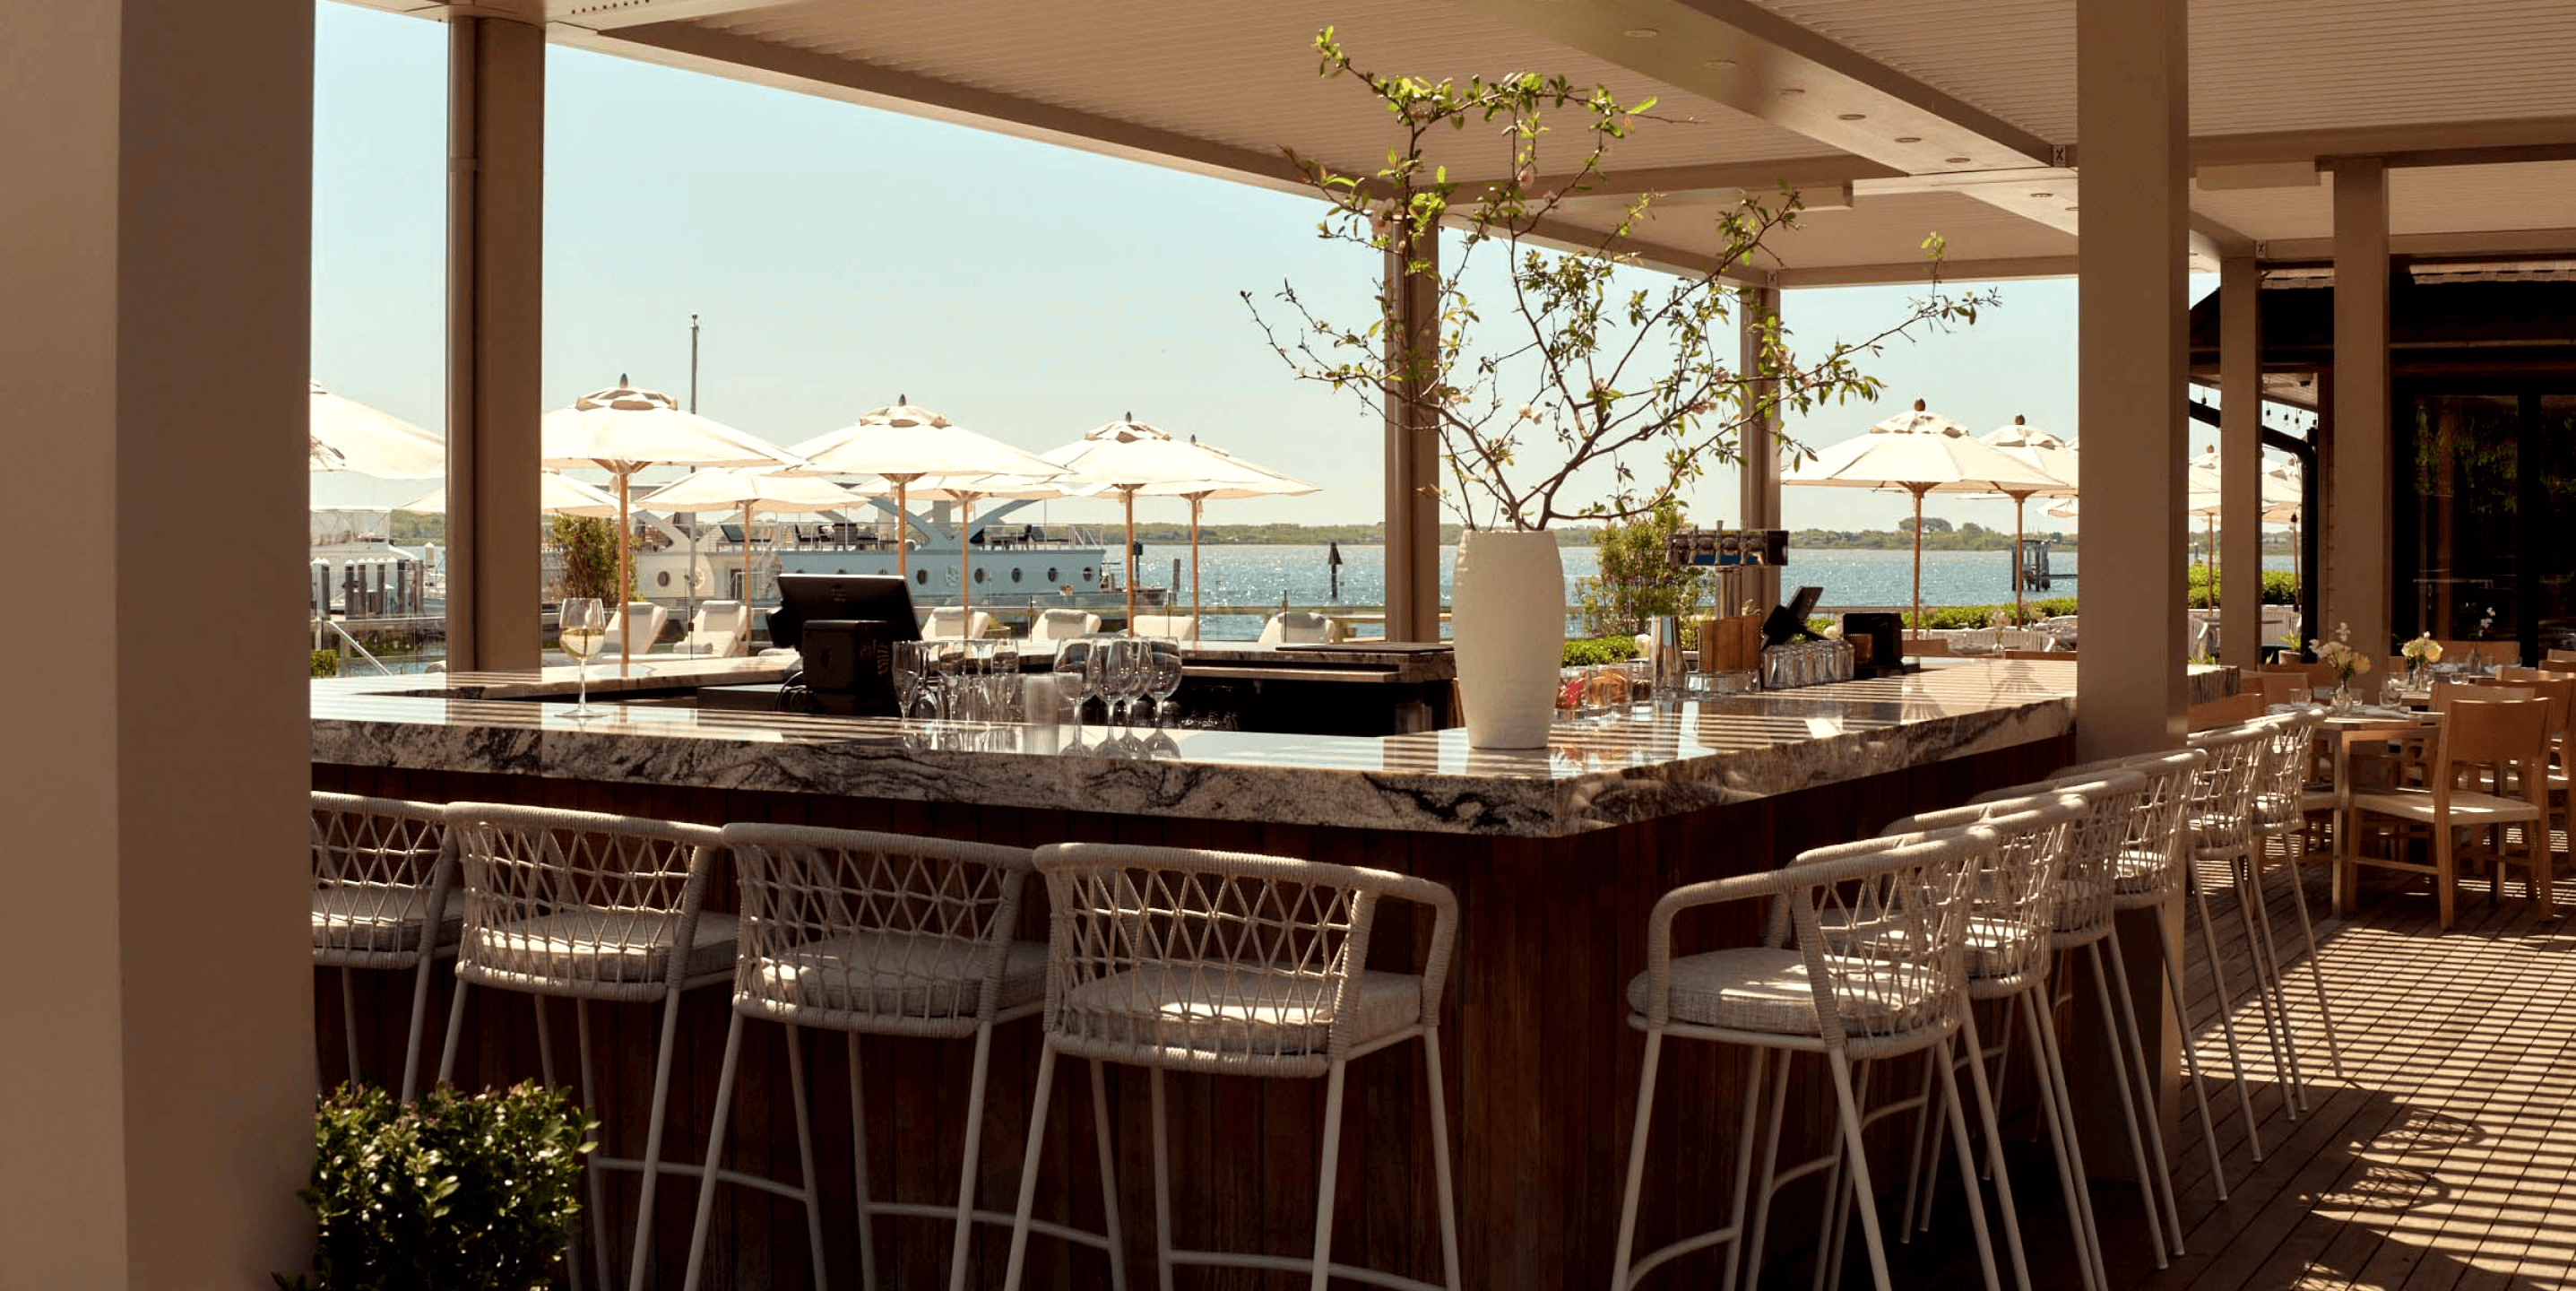 Long chairs positioned beside the bar counter offer a stunning view of the sea.